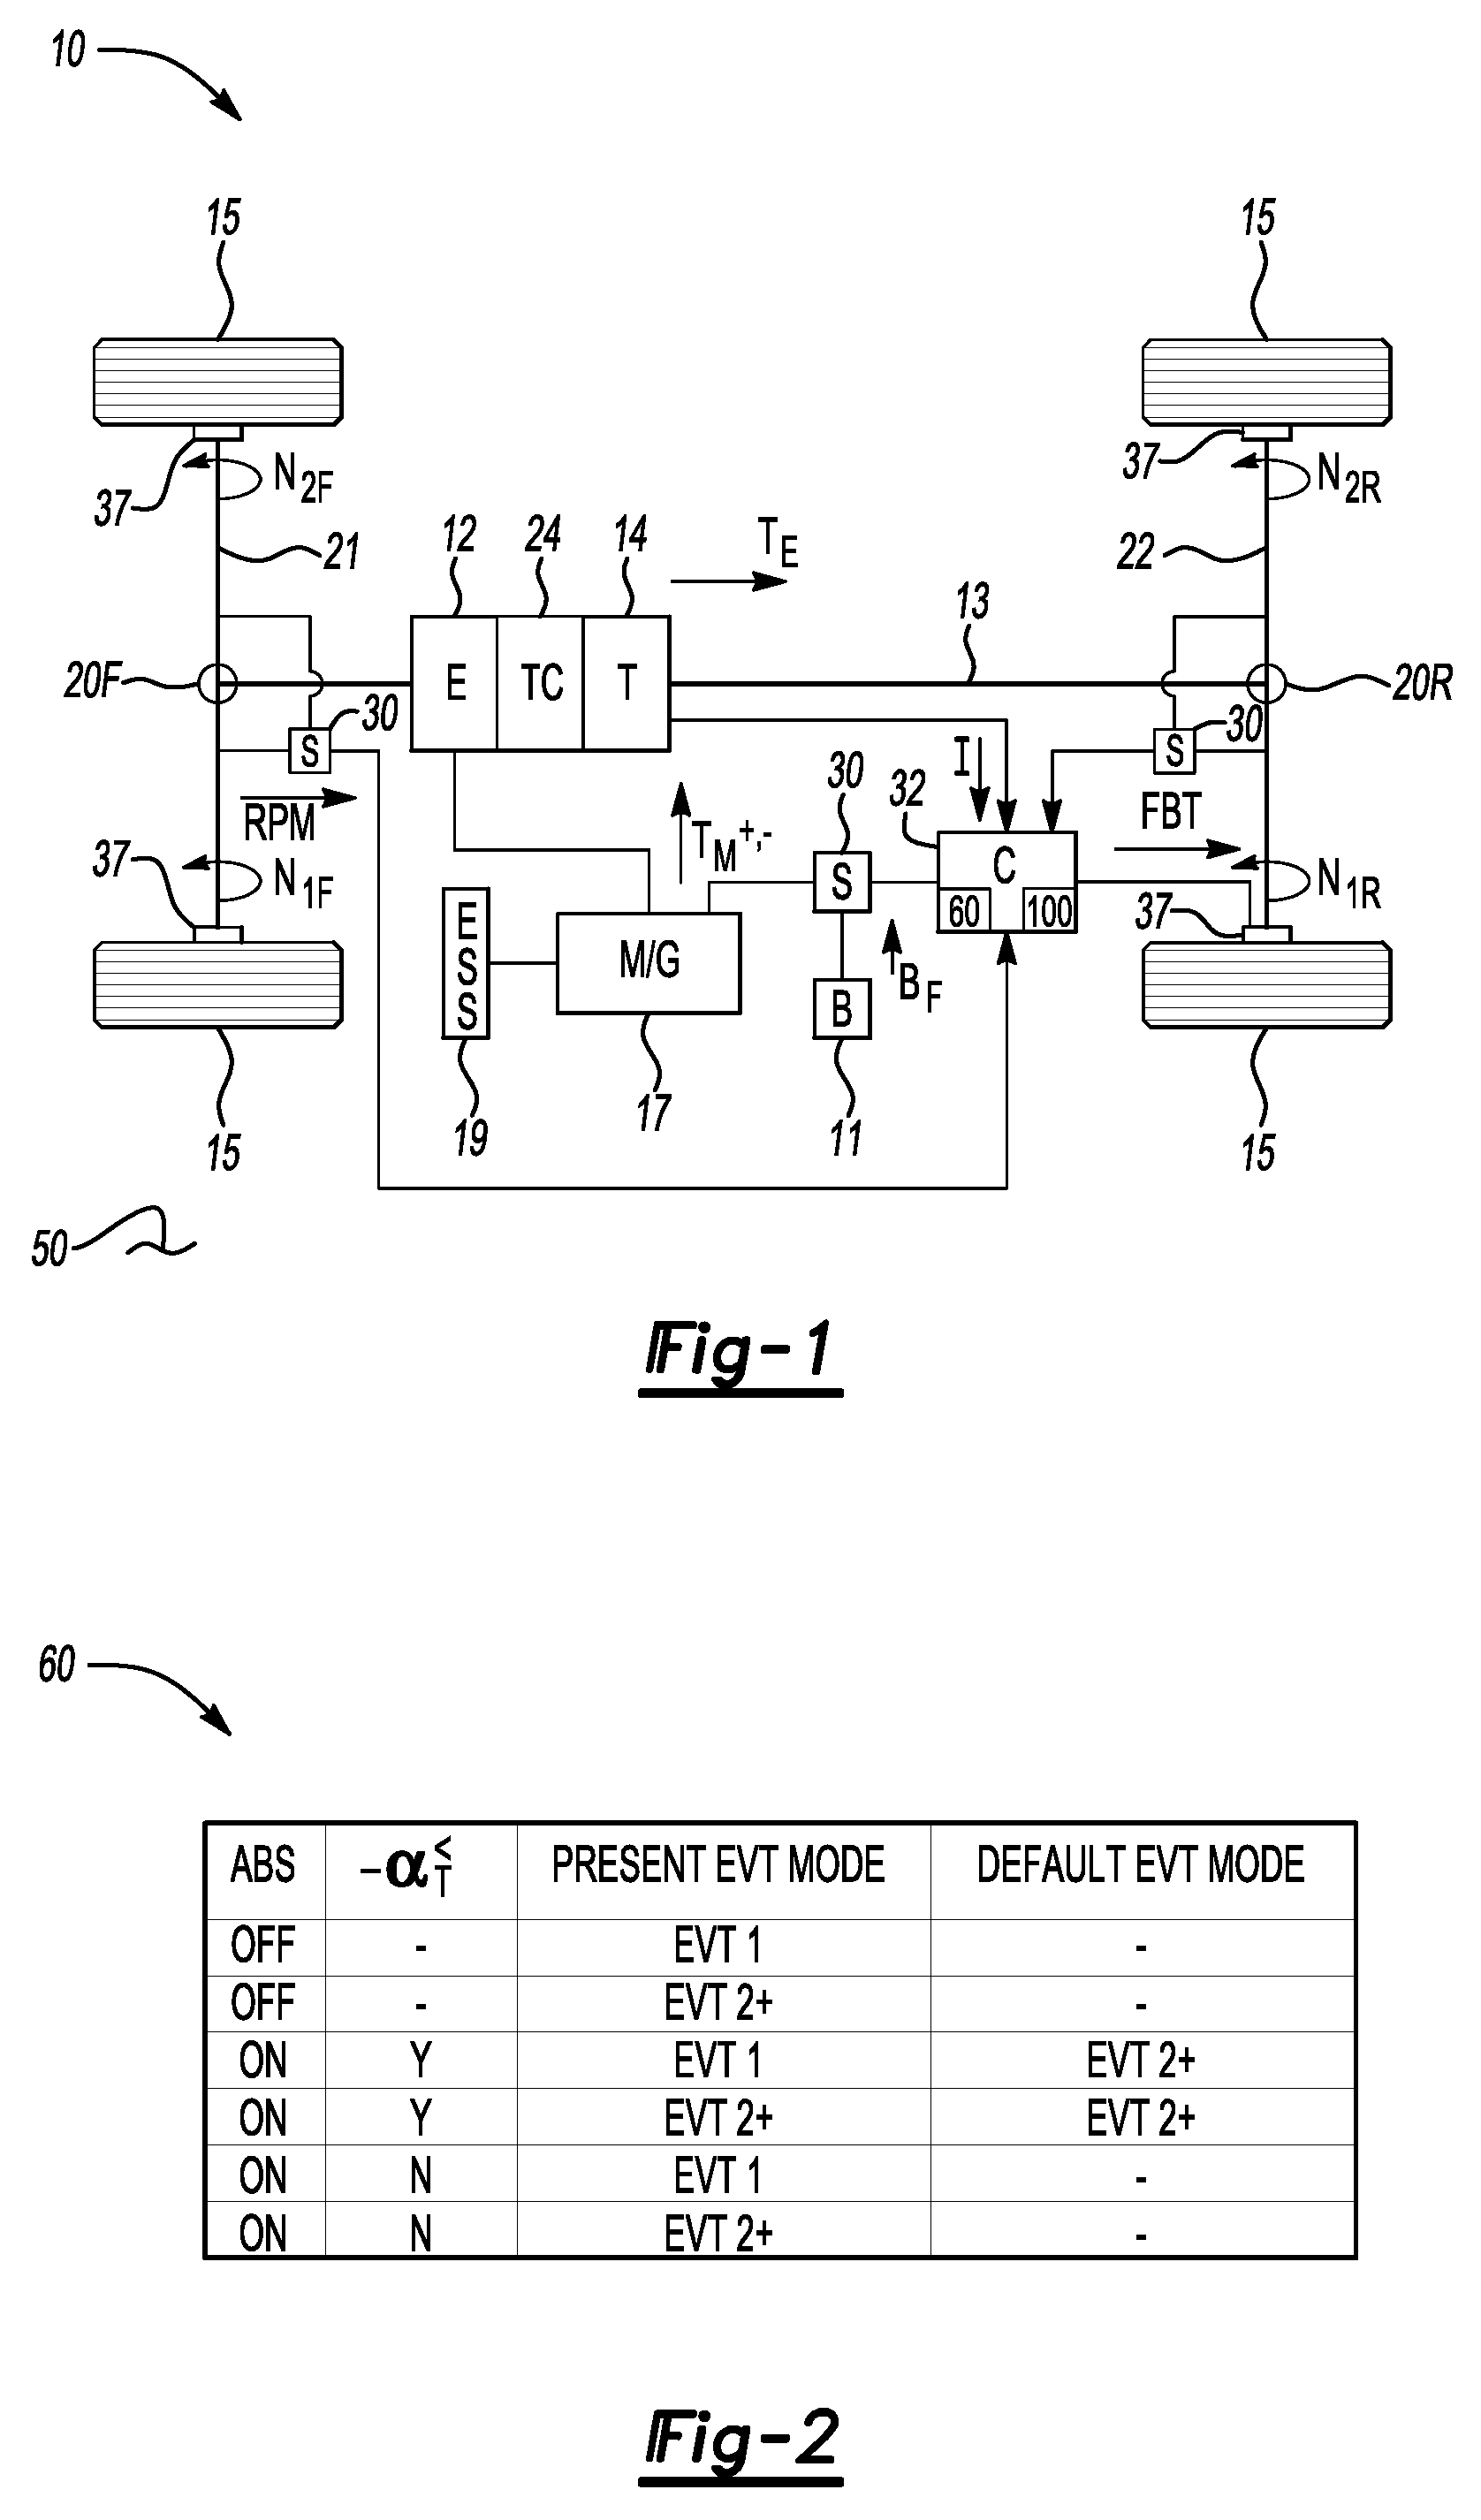 Method and Apparatus For Optimizing Braking Control During A Threshold Braking Event